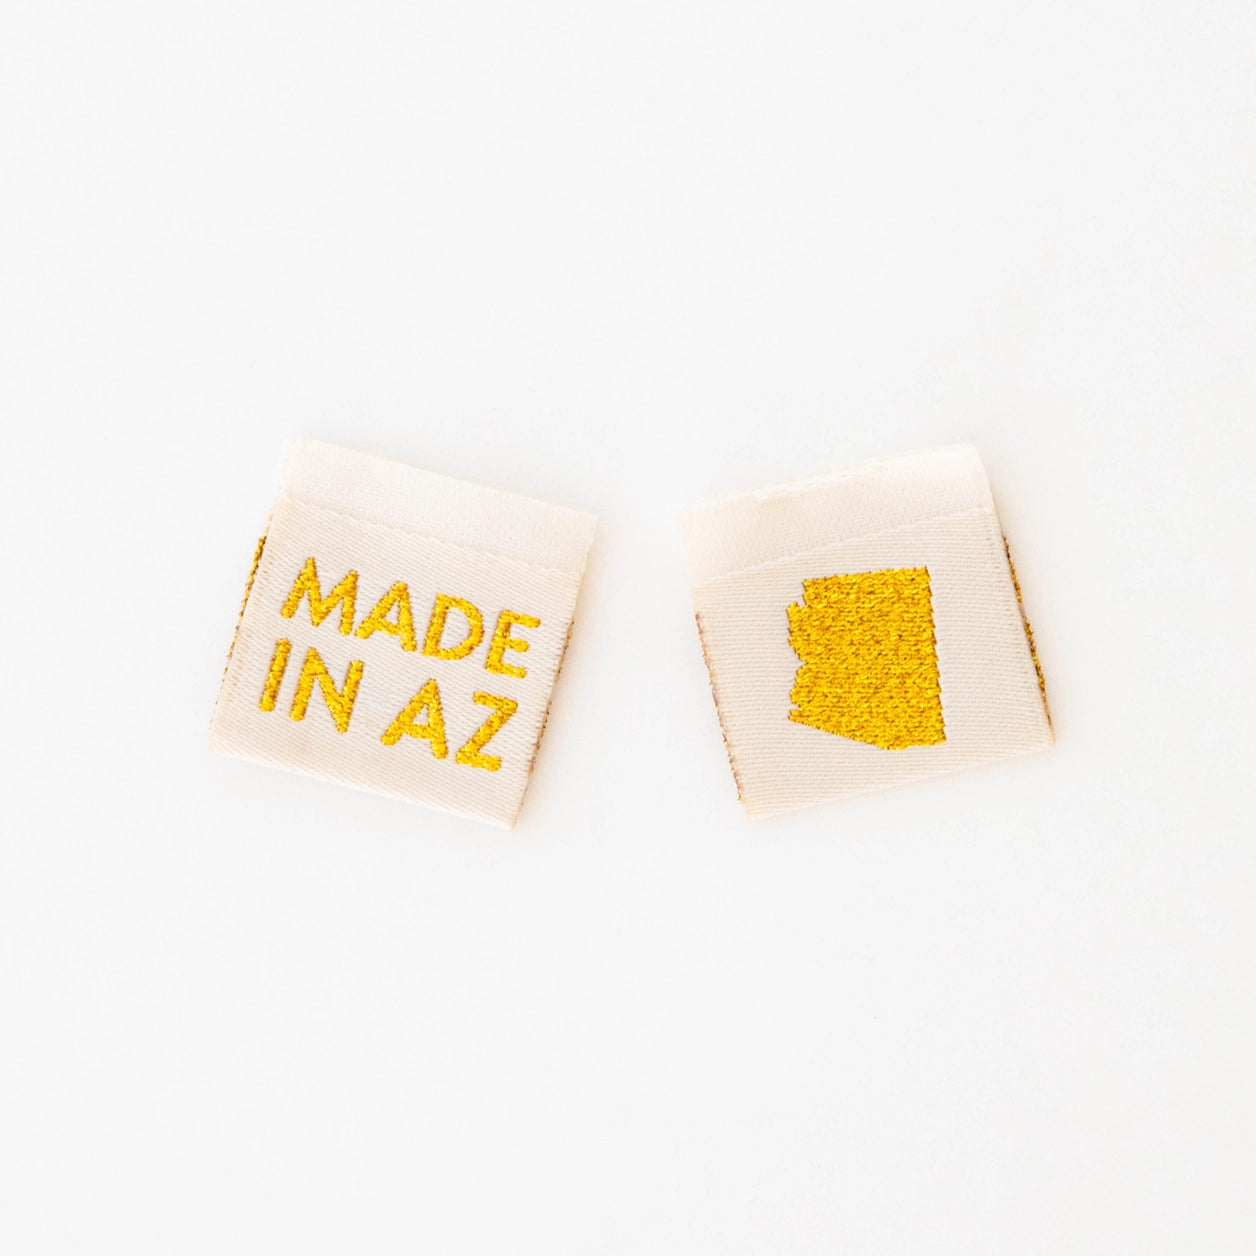 Made in Arizona - Gold Sewing Woven Labels by Sarah Hearts